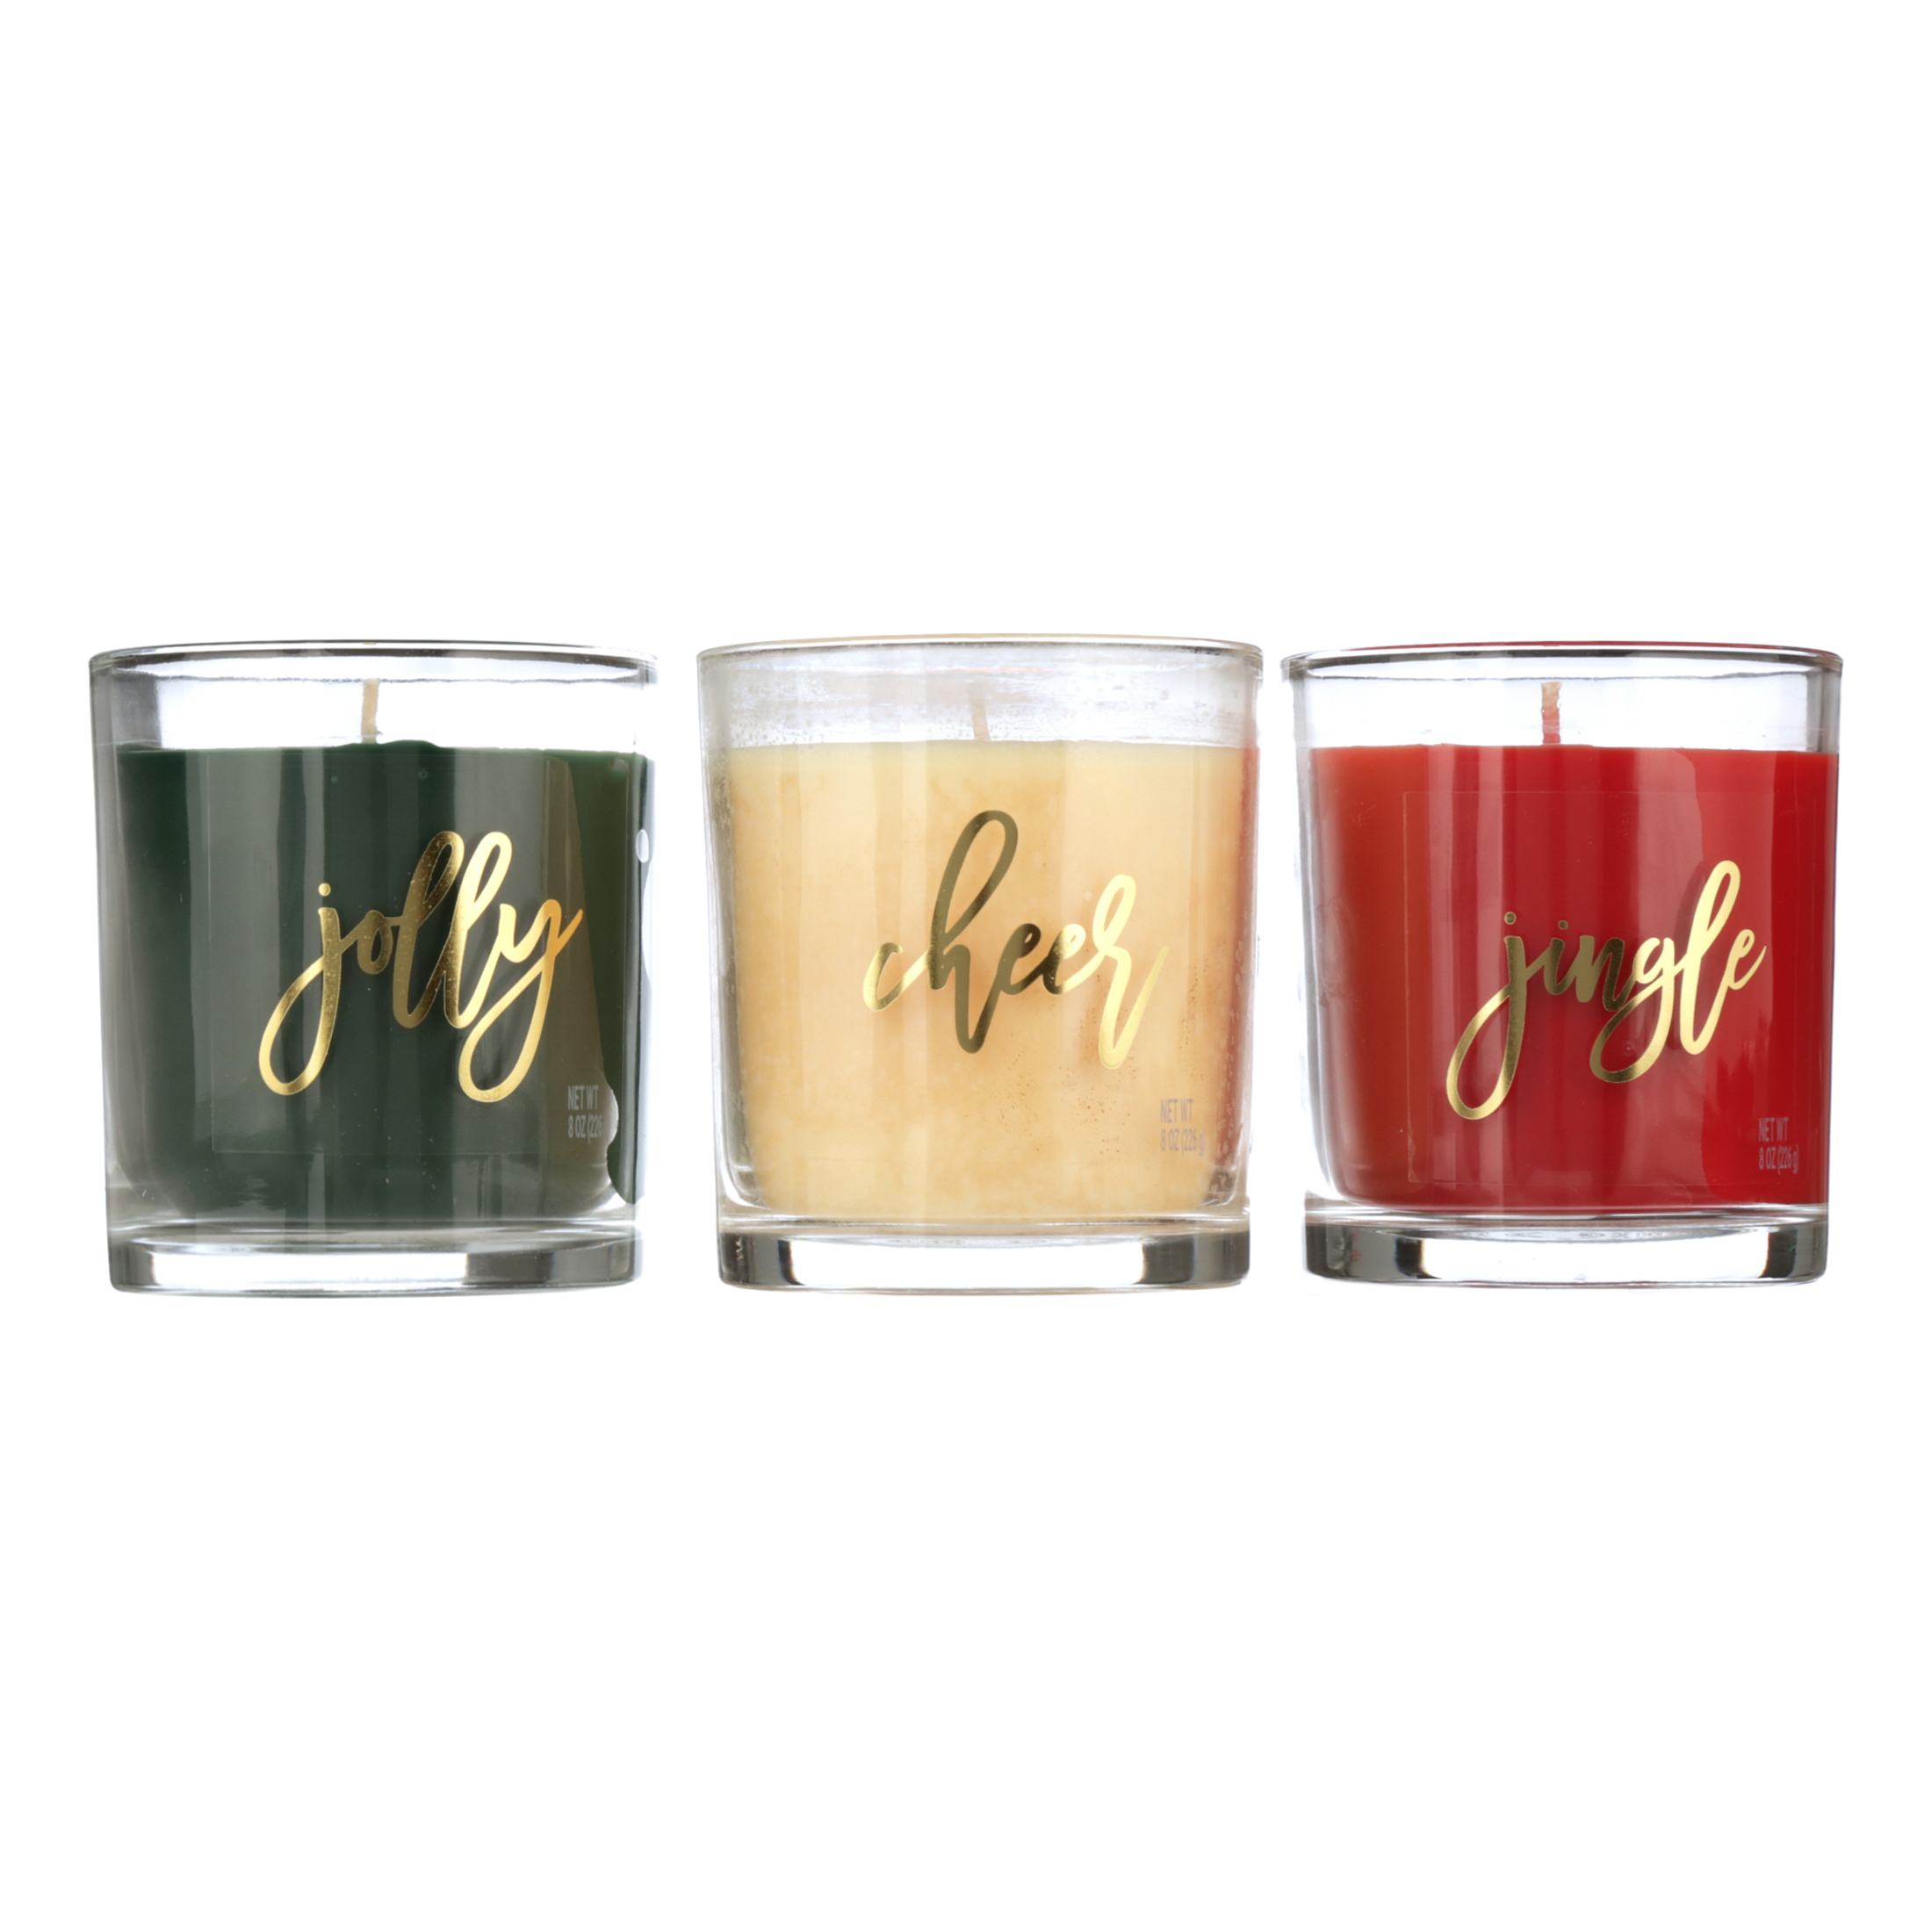 Yankee Candle 3-Pack Holiday Gift Set - image 3 of 8